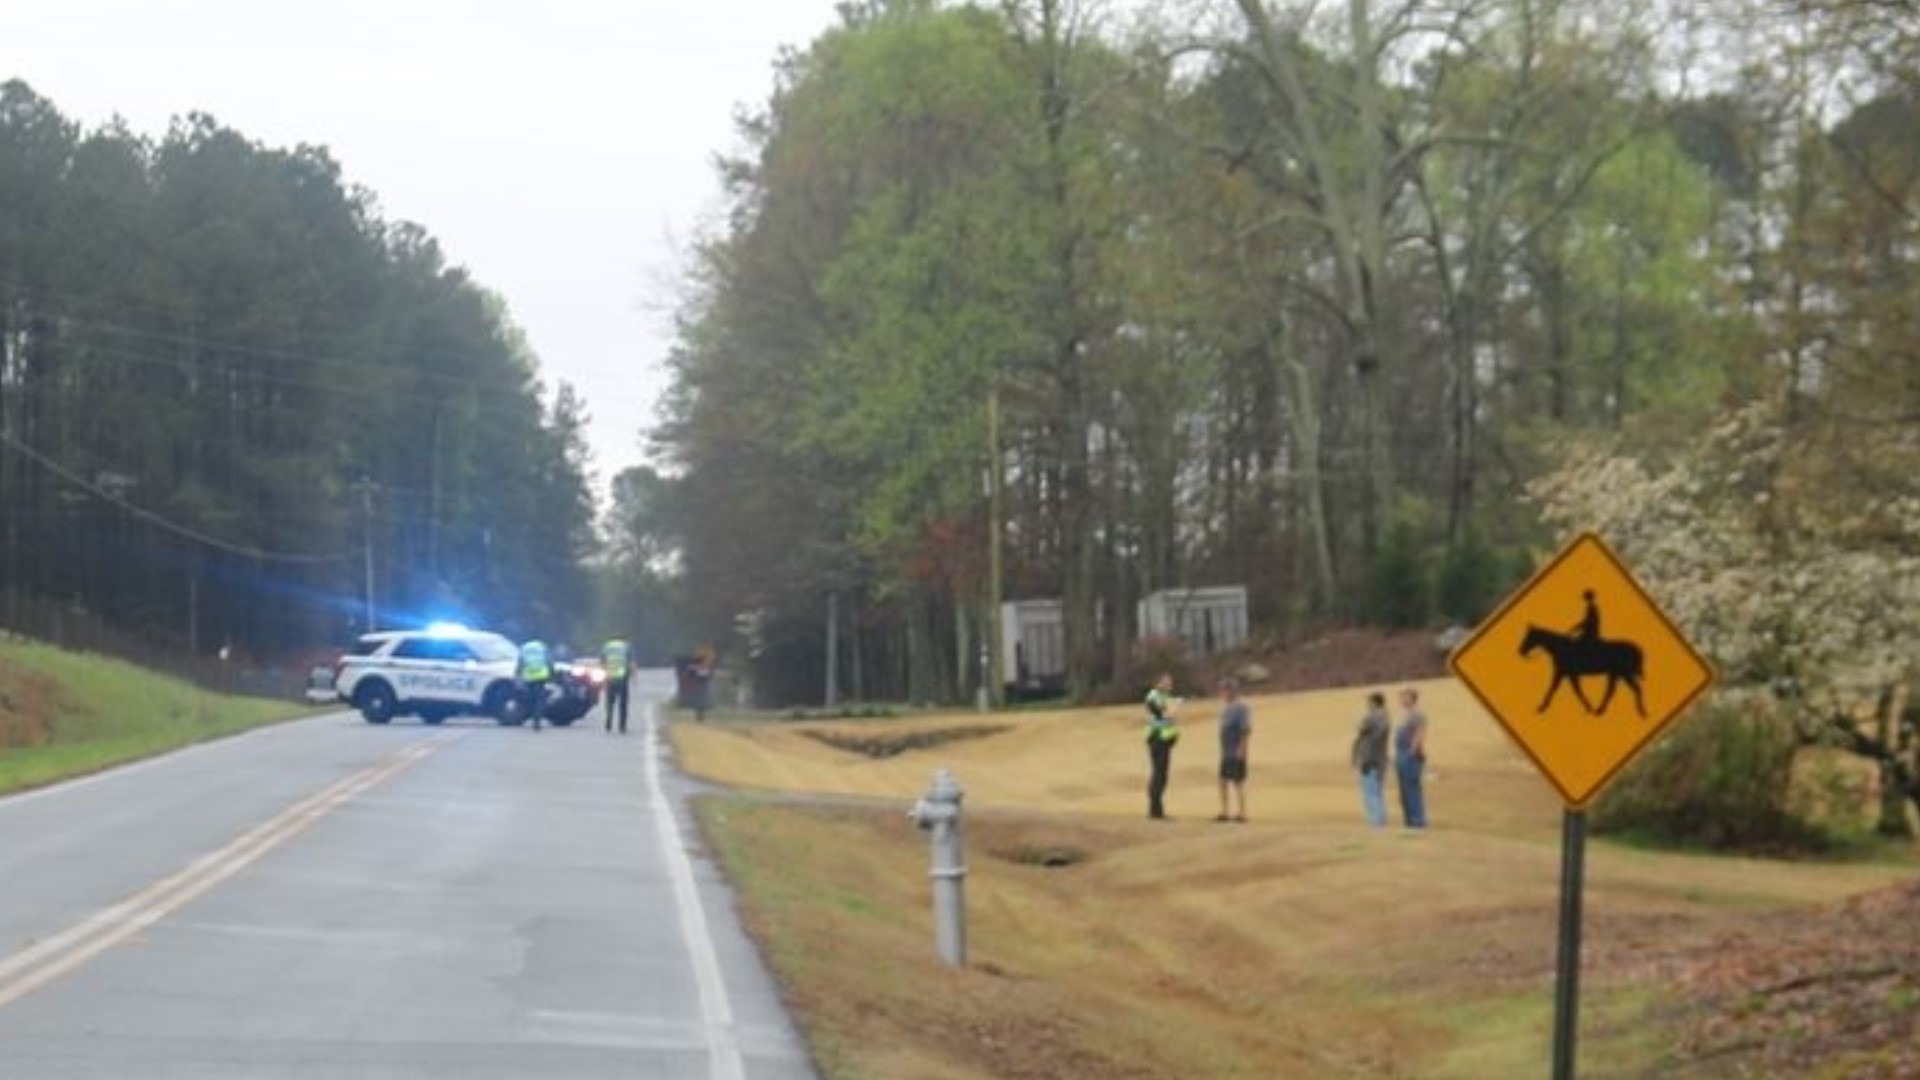 Gwinnett County Police said the 33-year-old was left in a ditch after being hit at Kilcrease Road. They are looking for a 2016 to 2018 Hyundai Santa.